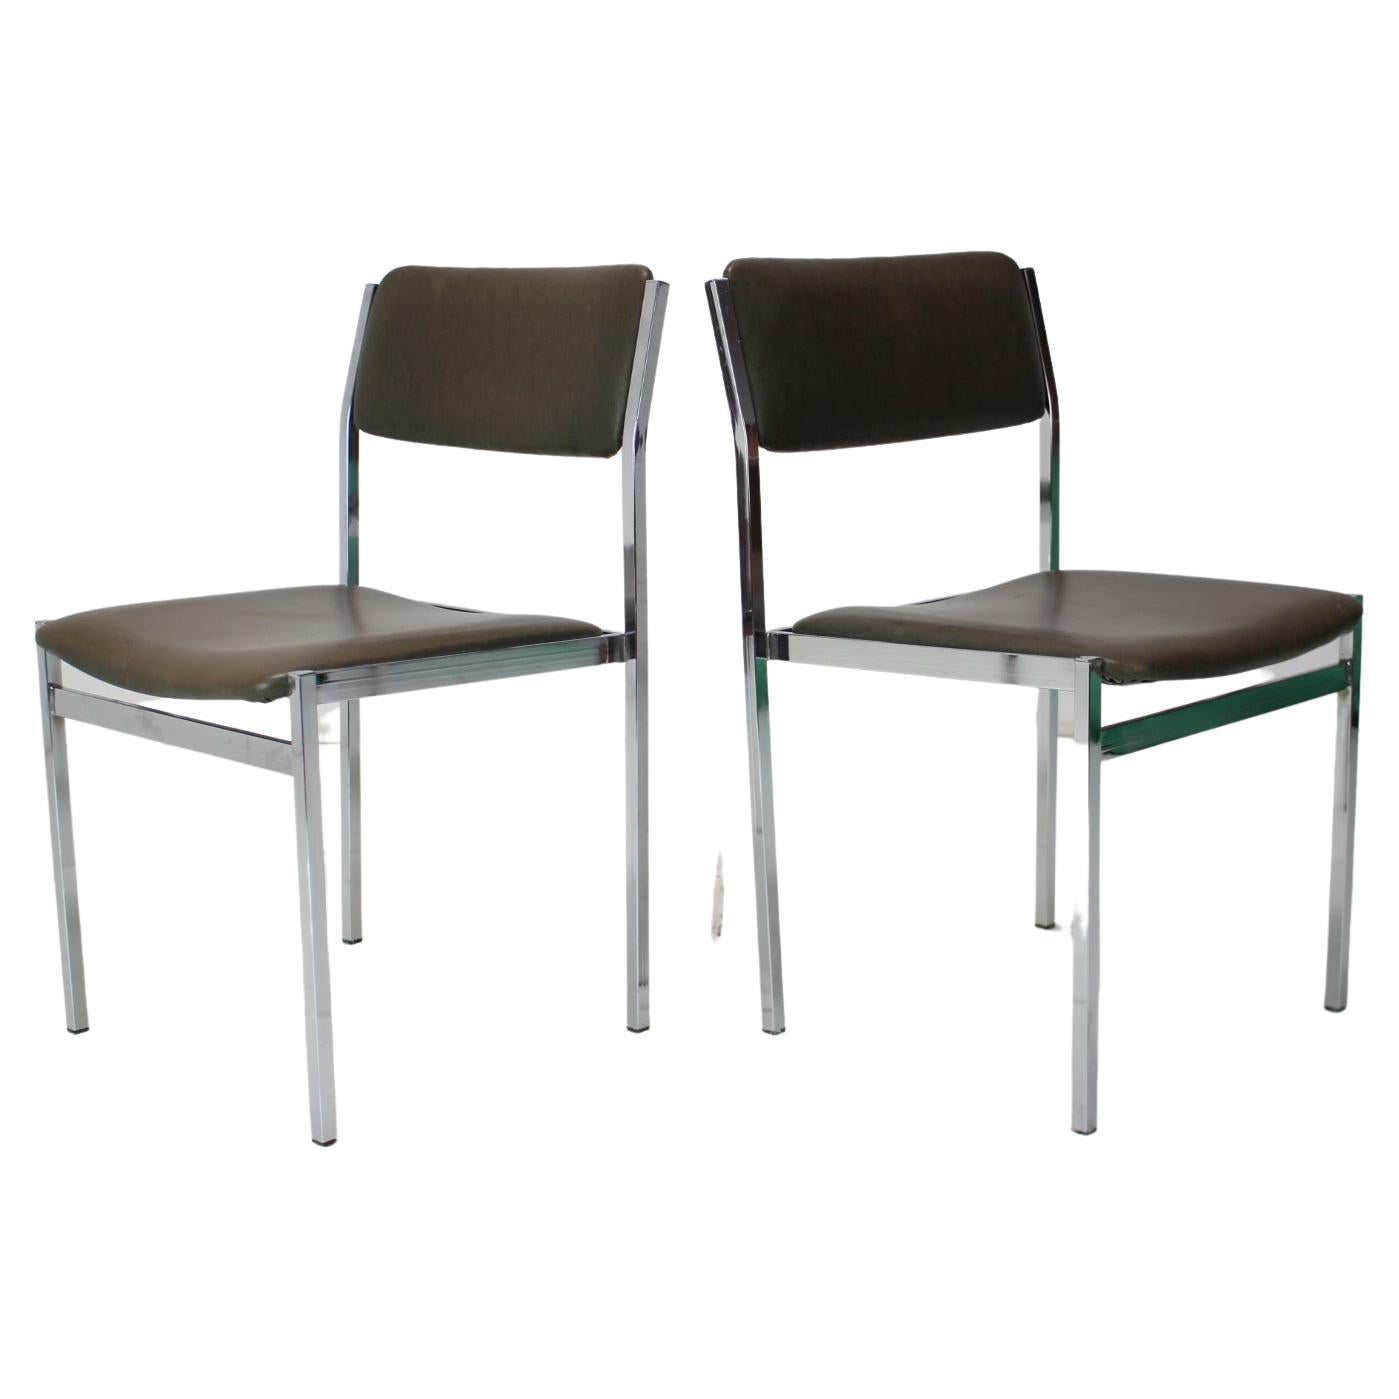 Set of Two Chrome Chairs, 1970's